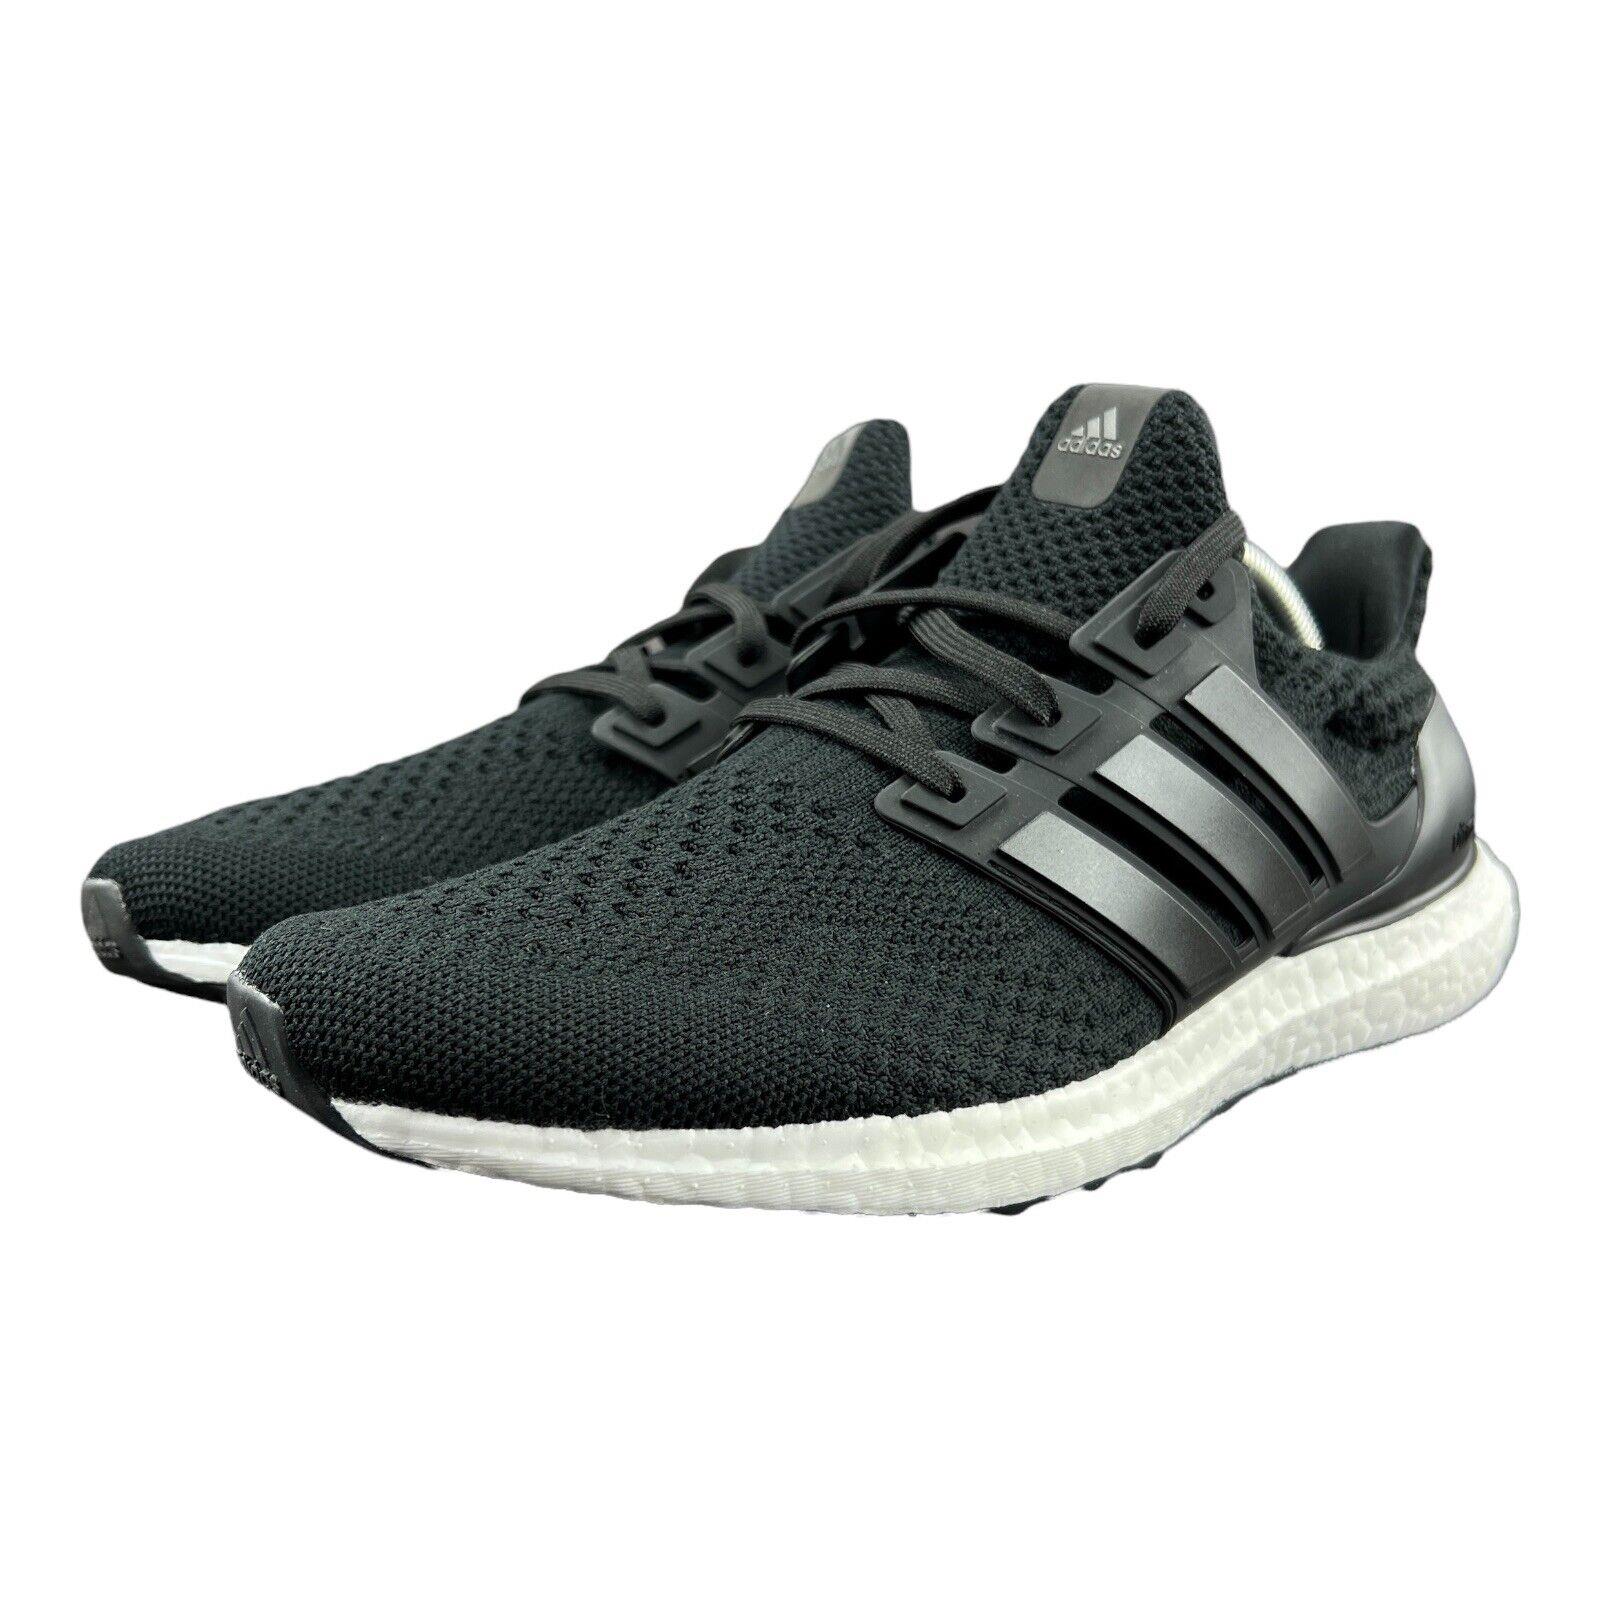 Adidas shoes UltraBoost DNA - Black 3